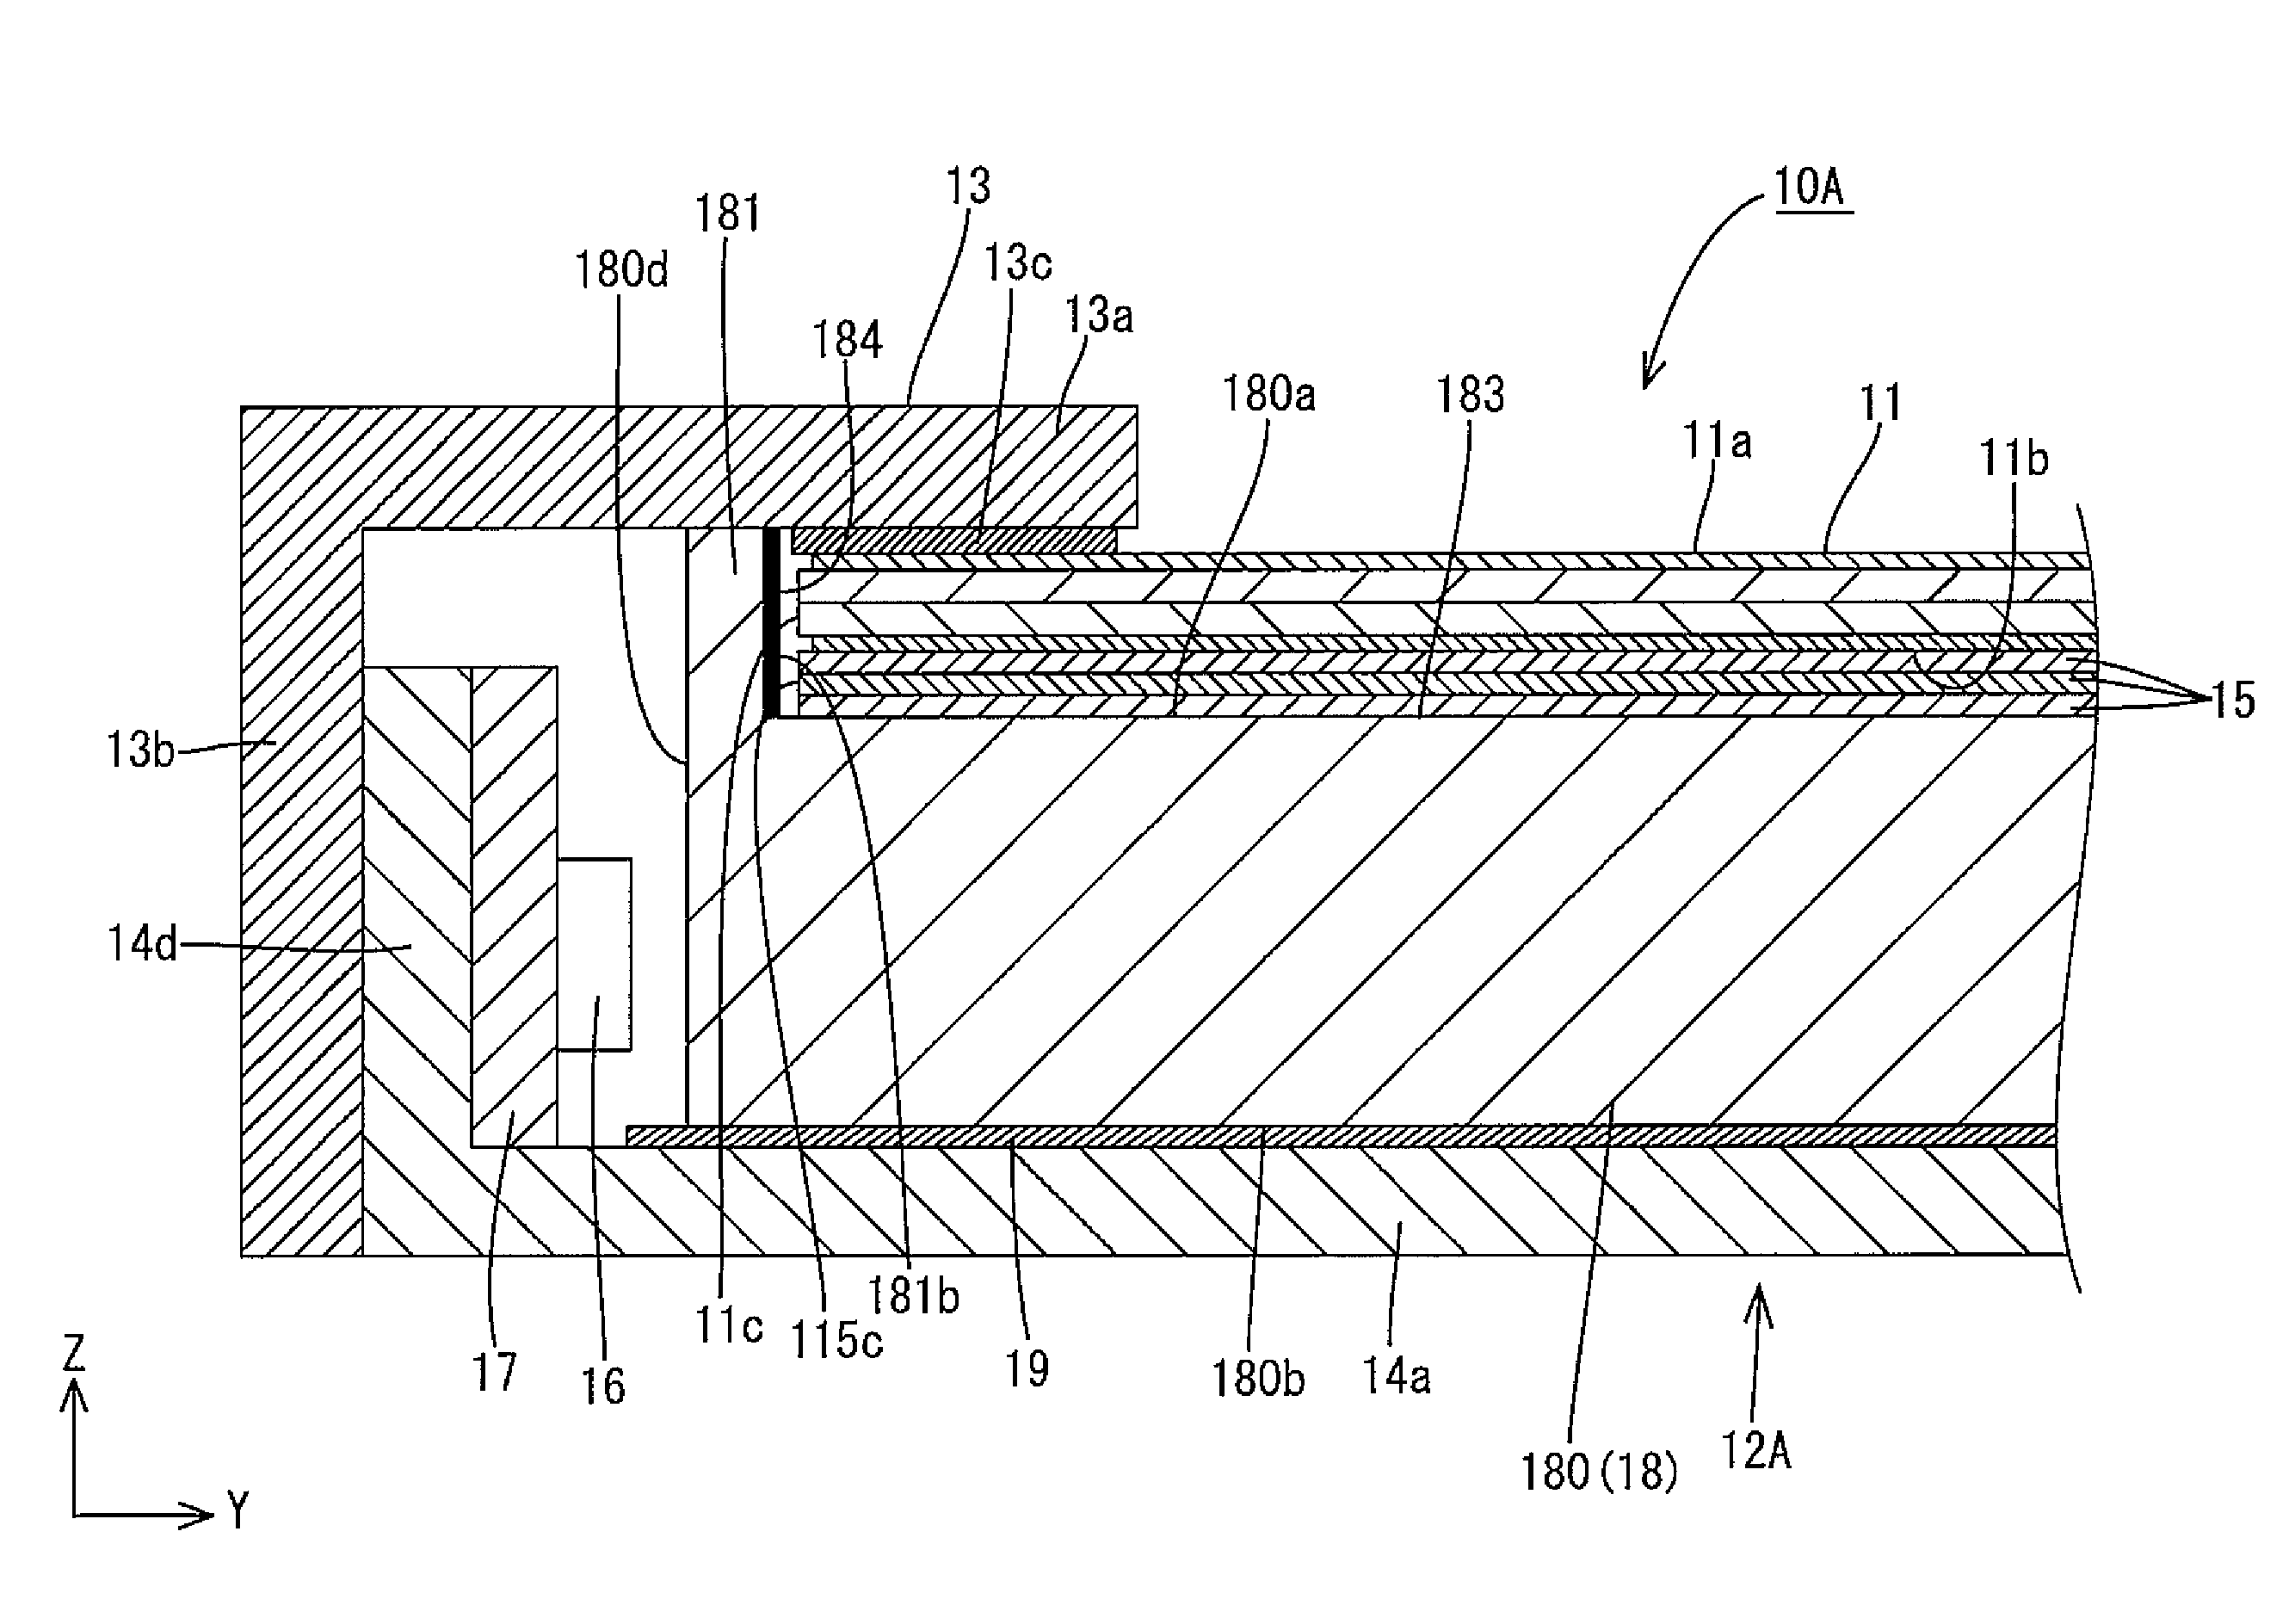 Display device and television device